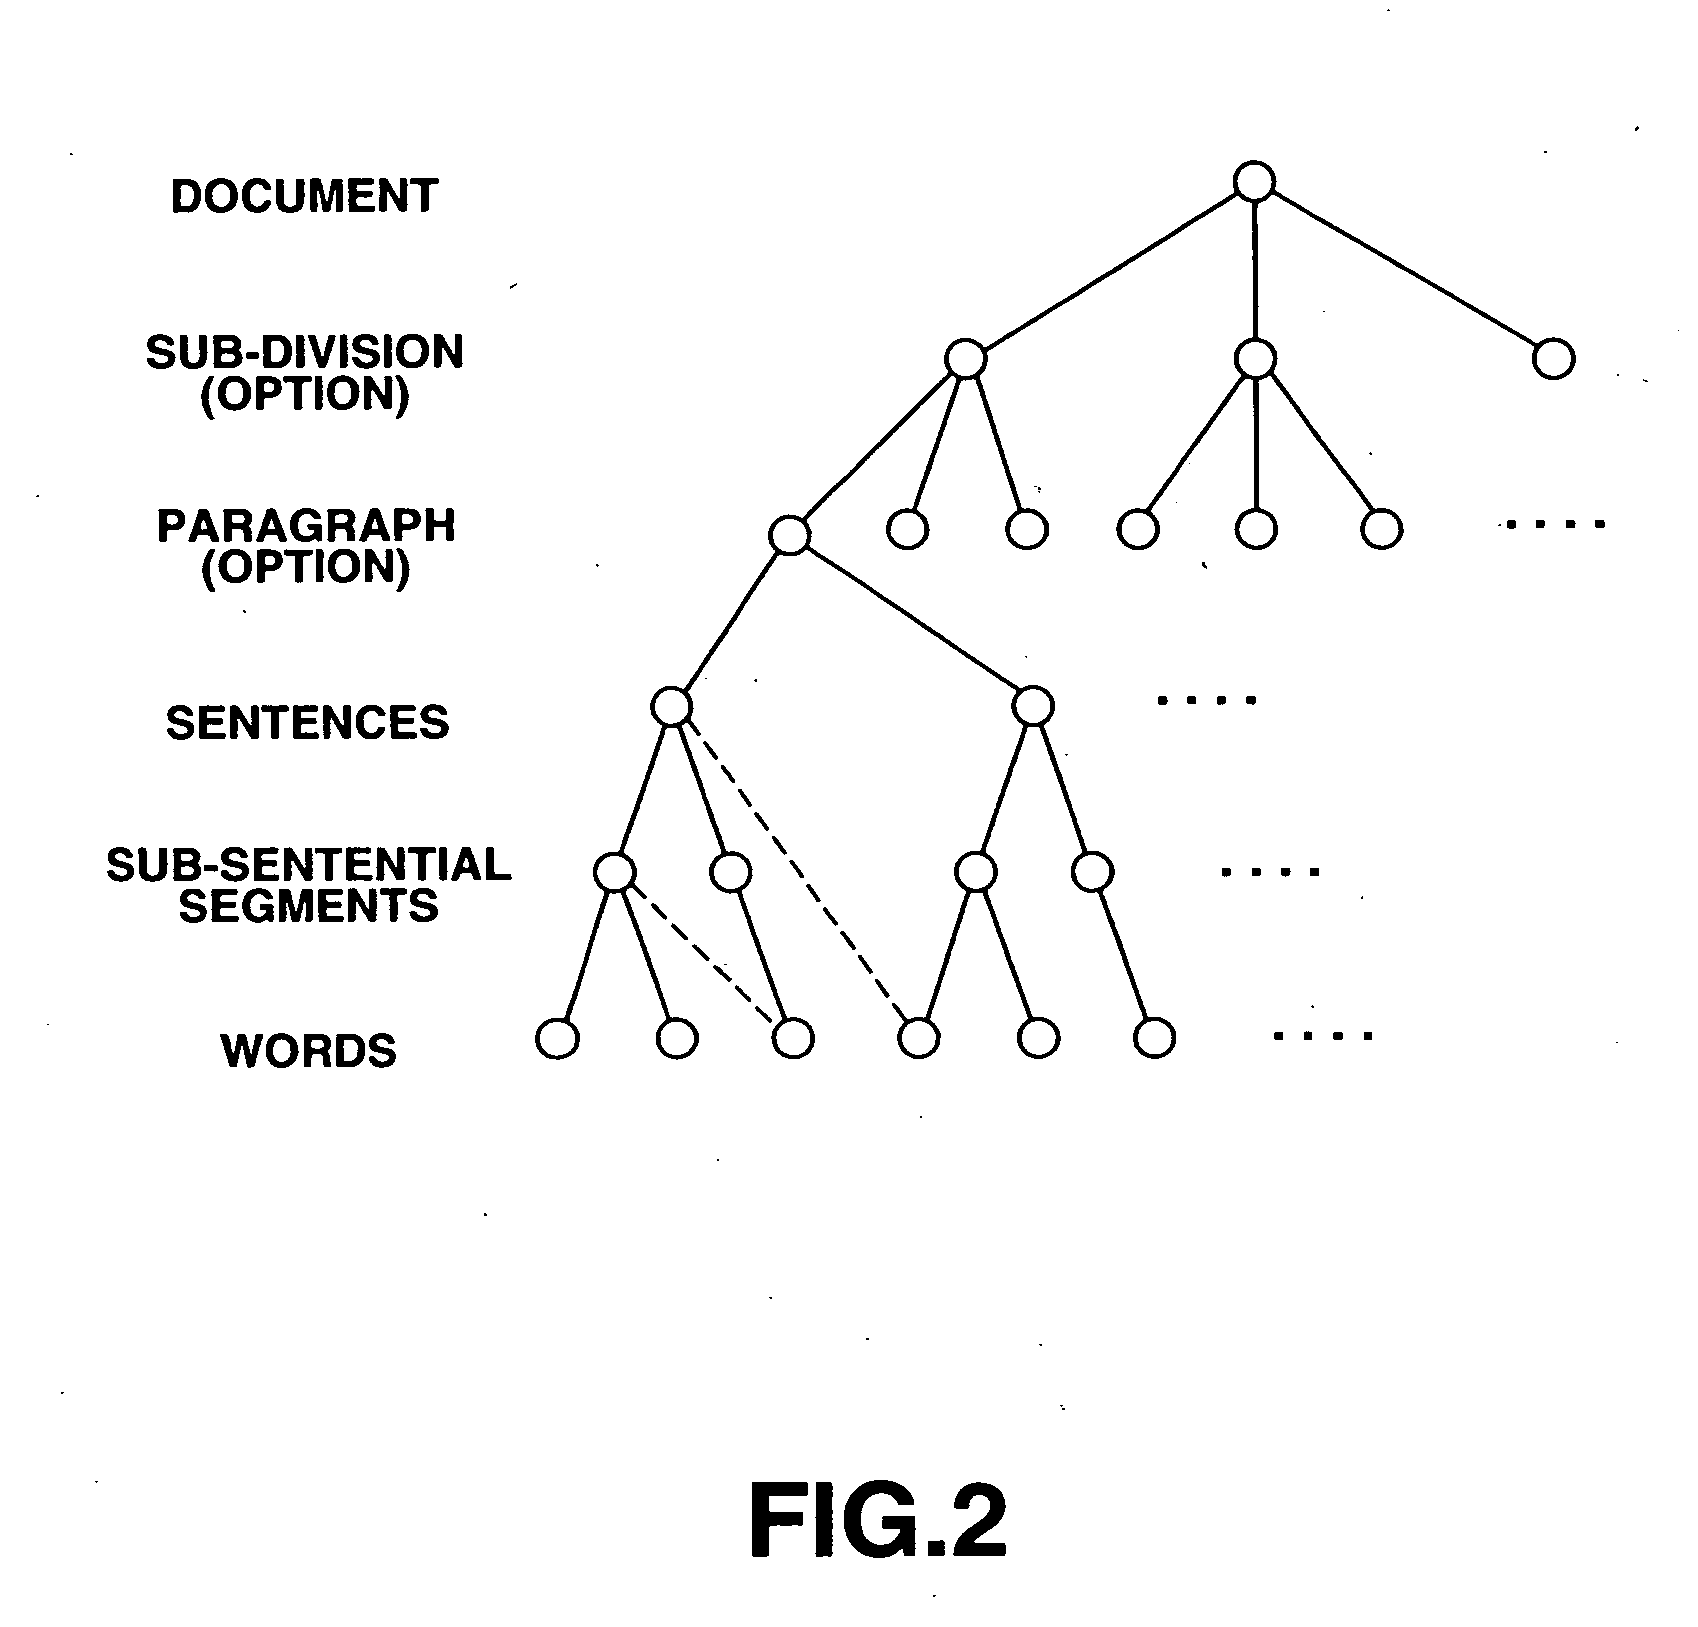 Electronic document processing apparatus